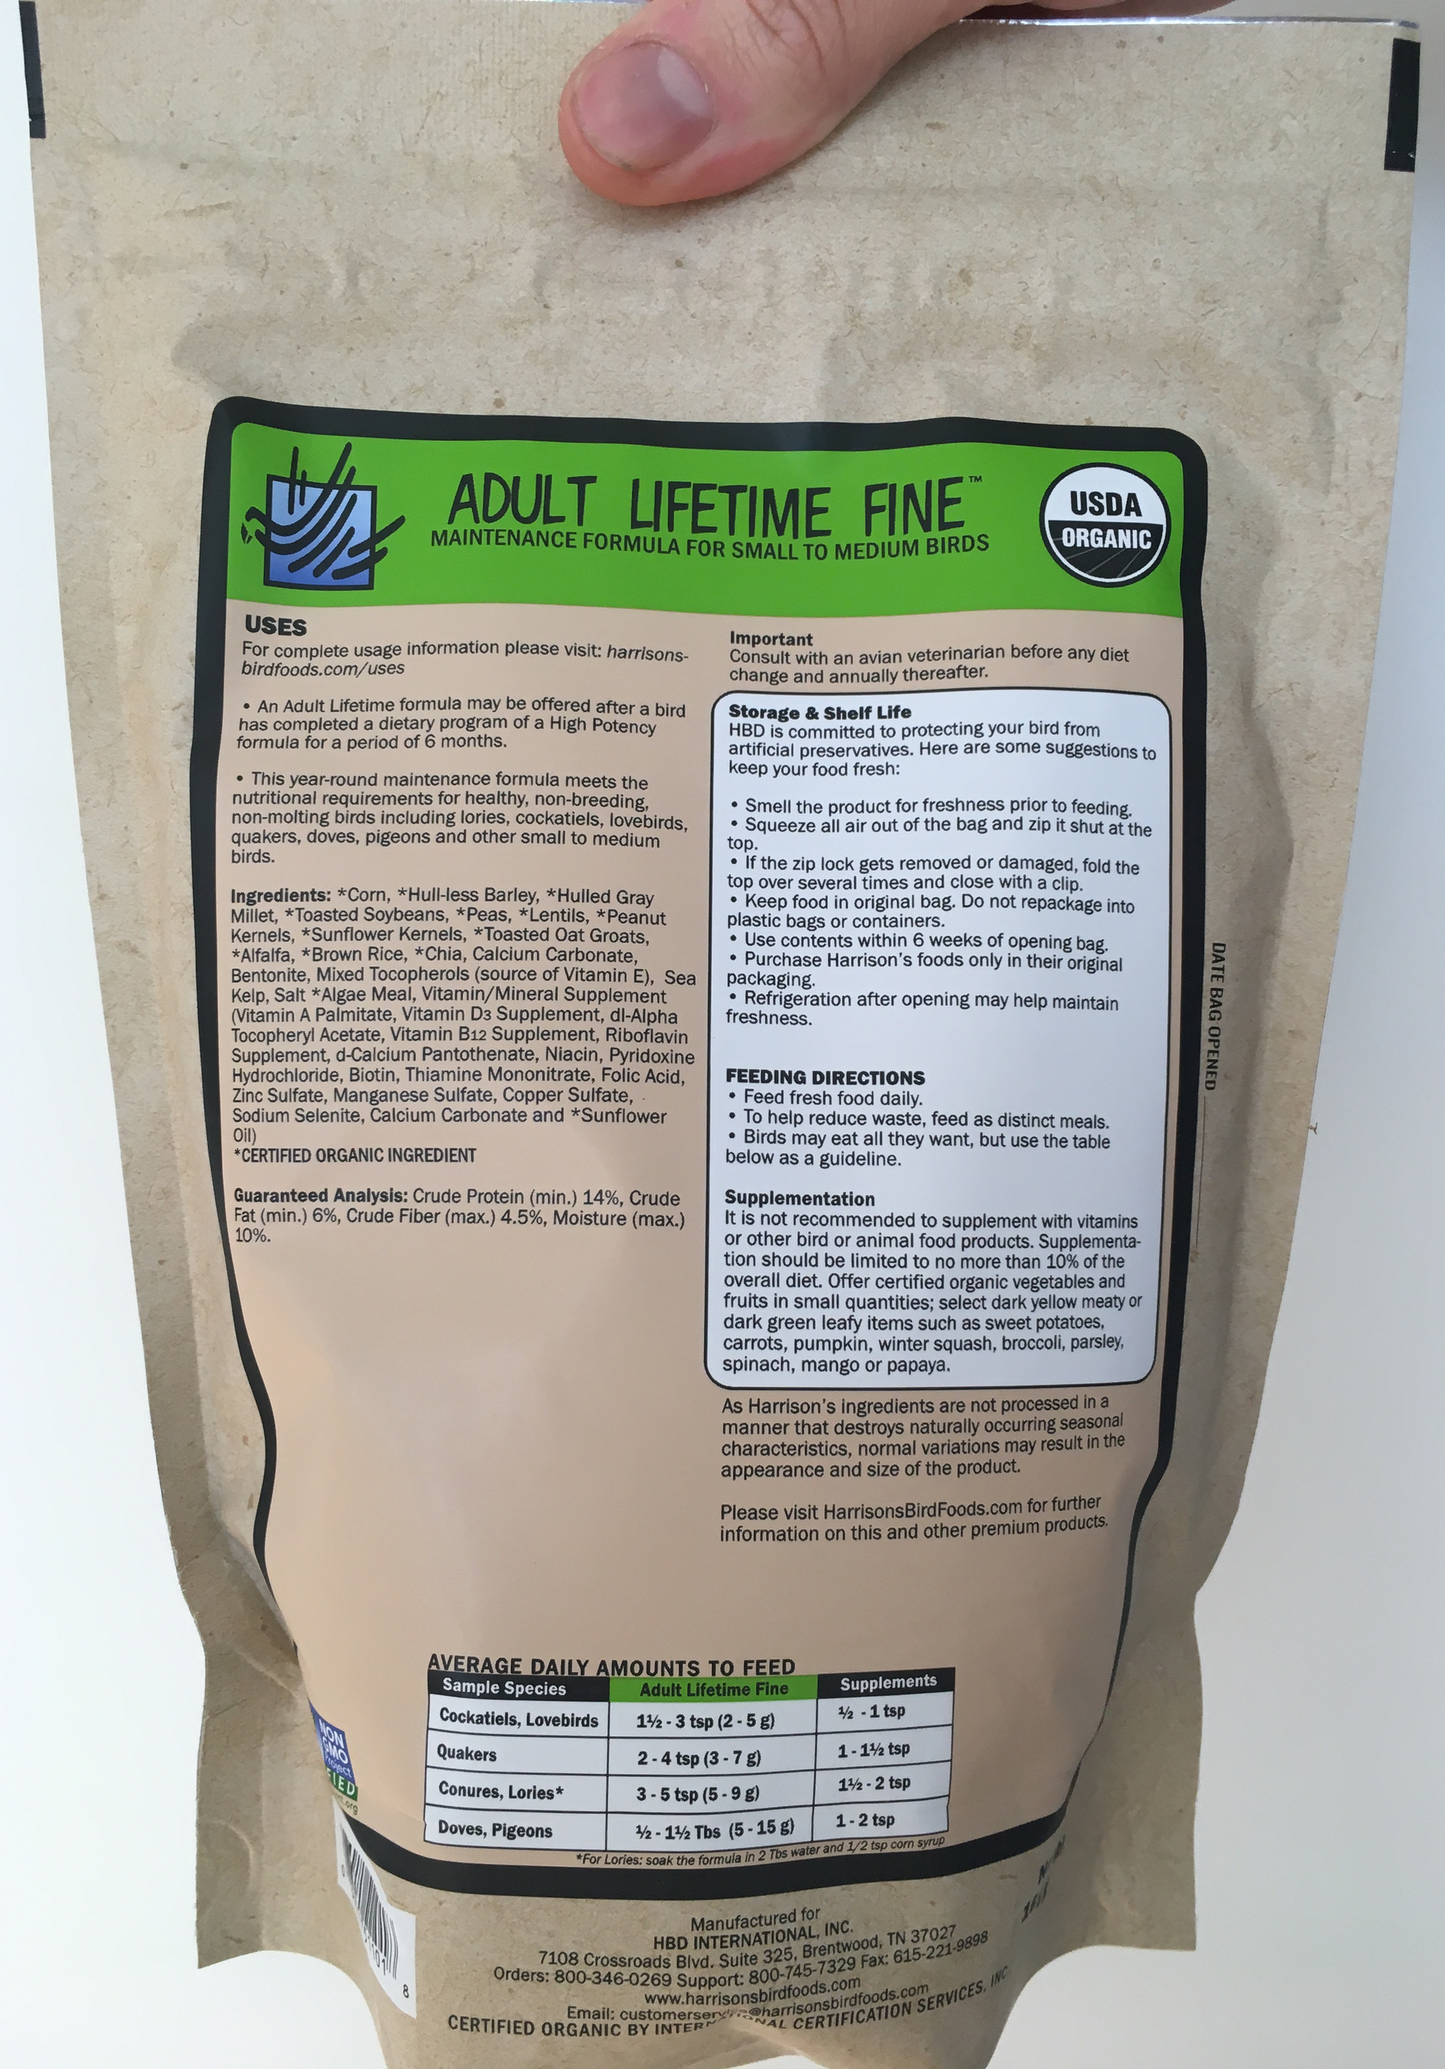 back of the green bag of Harrison's Adult Lifetime Fine premium pellets for parrots, shows feeding instructions, suitable for smaller birds